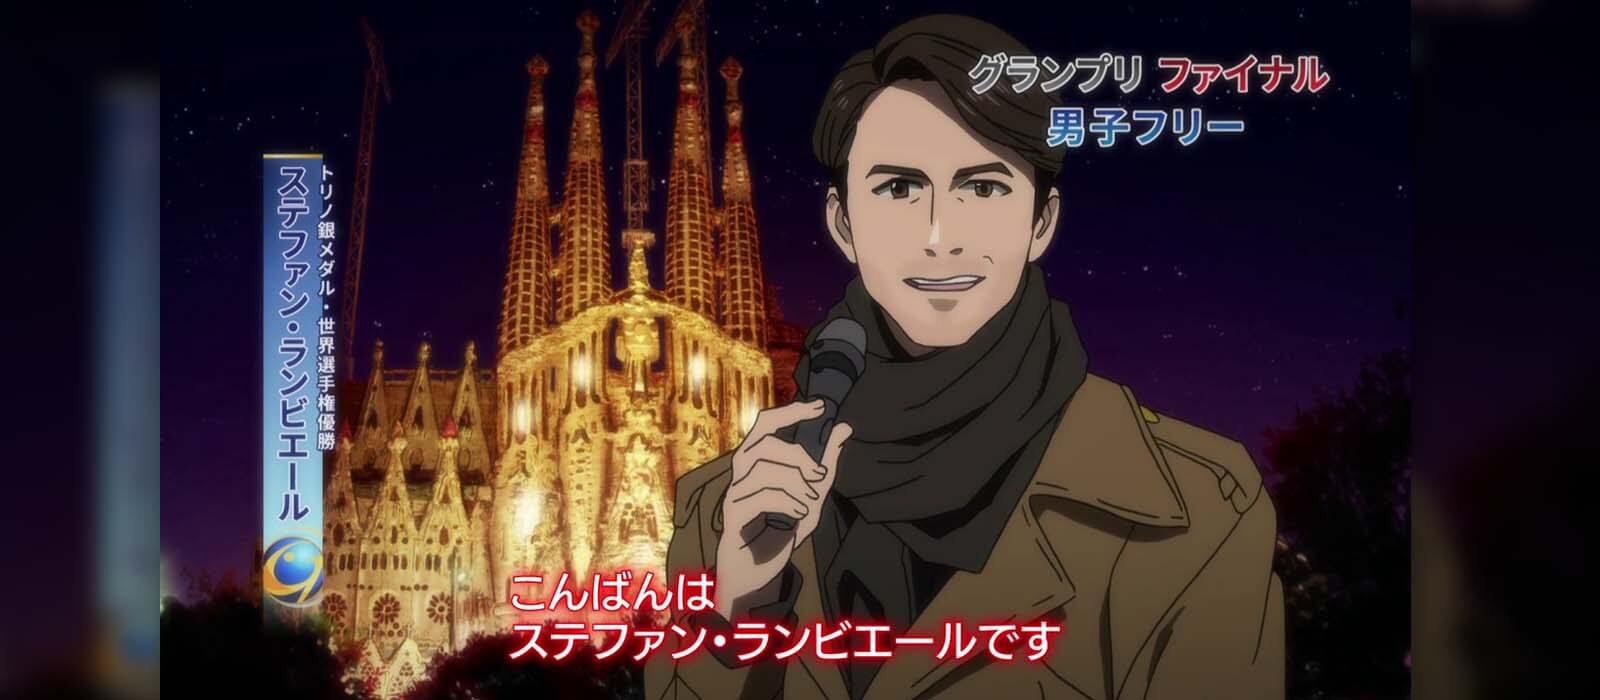 Stéphane Lambiel's guest appearance in Episode 12 of Yuri!!! on ICE